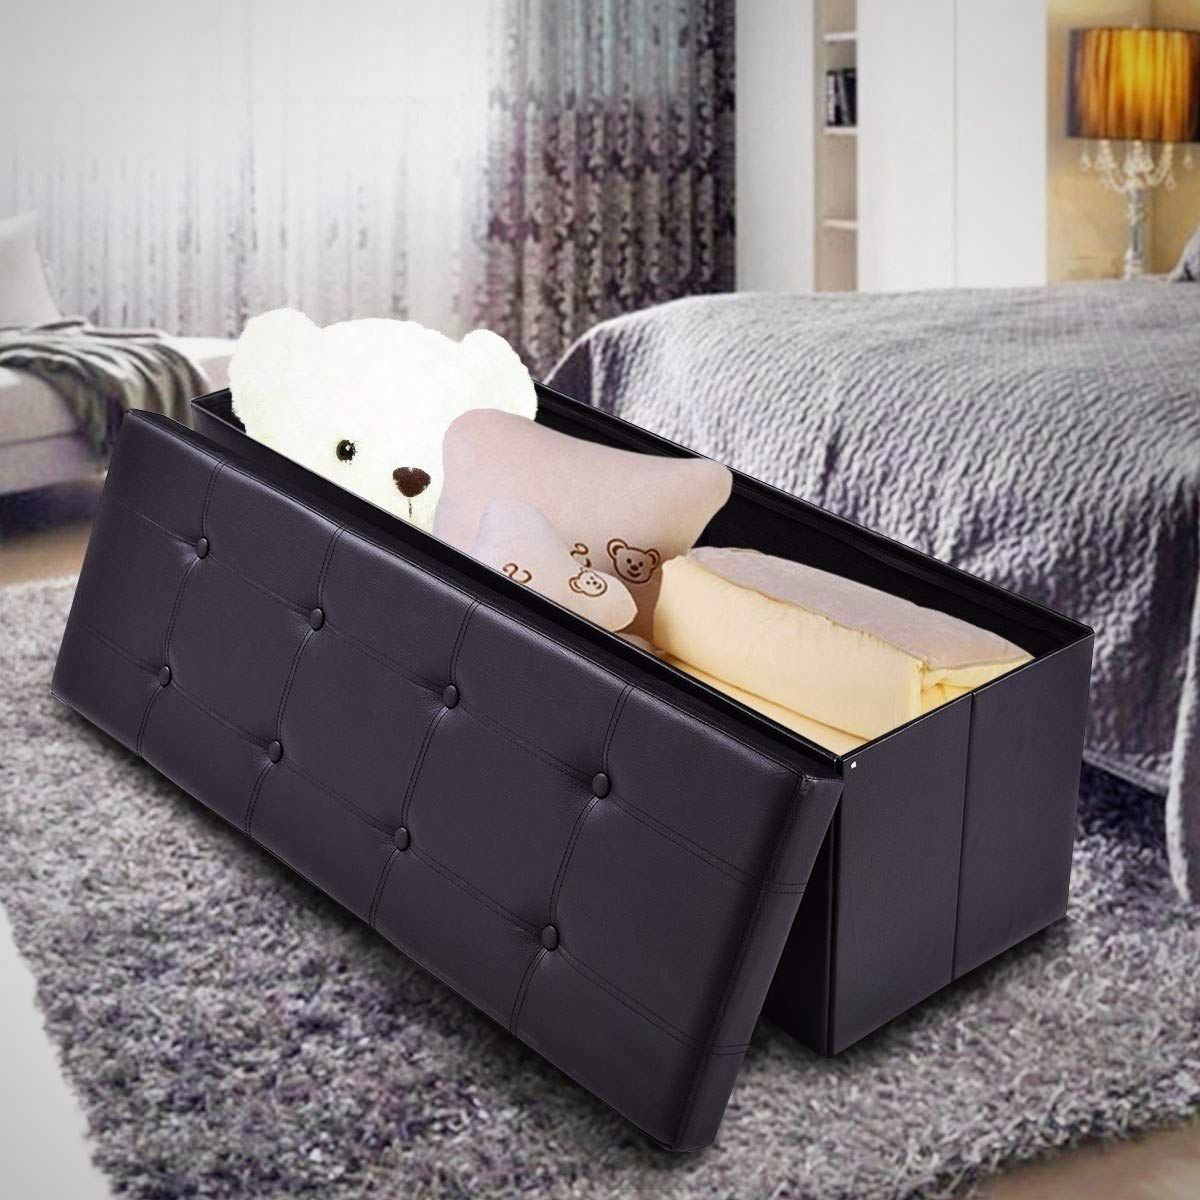 Bedroom Storage Chest Bench
 Toy Storage Chest Bench Seat For Kids Bedroom Room